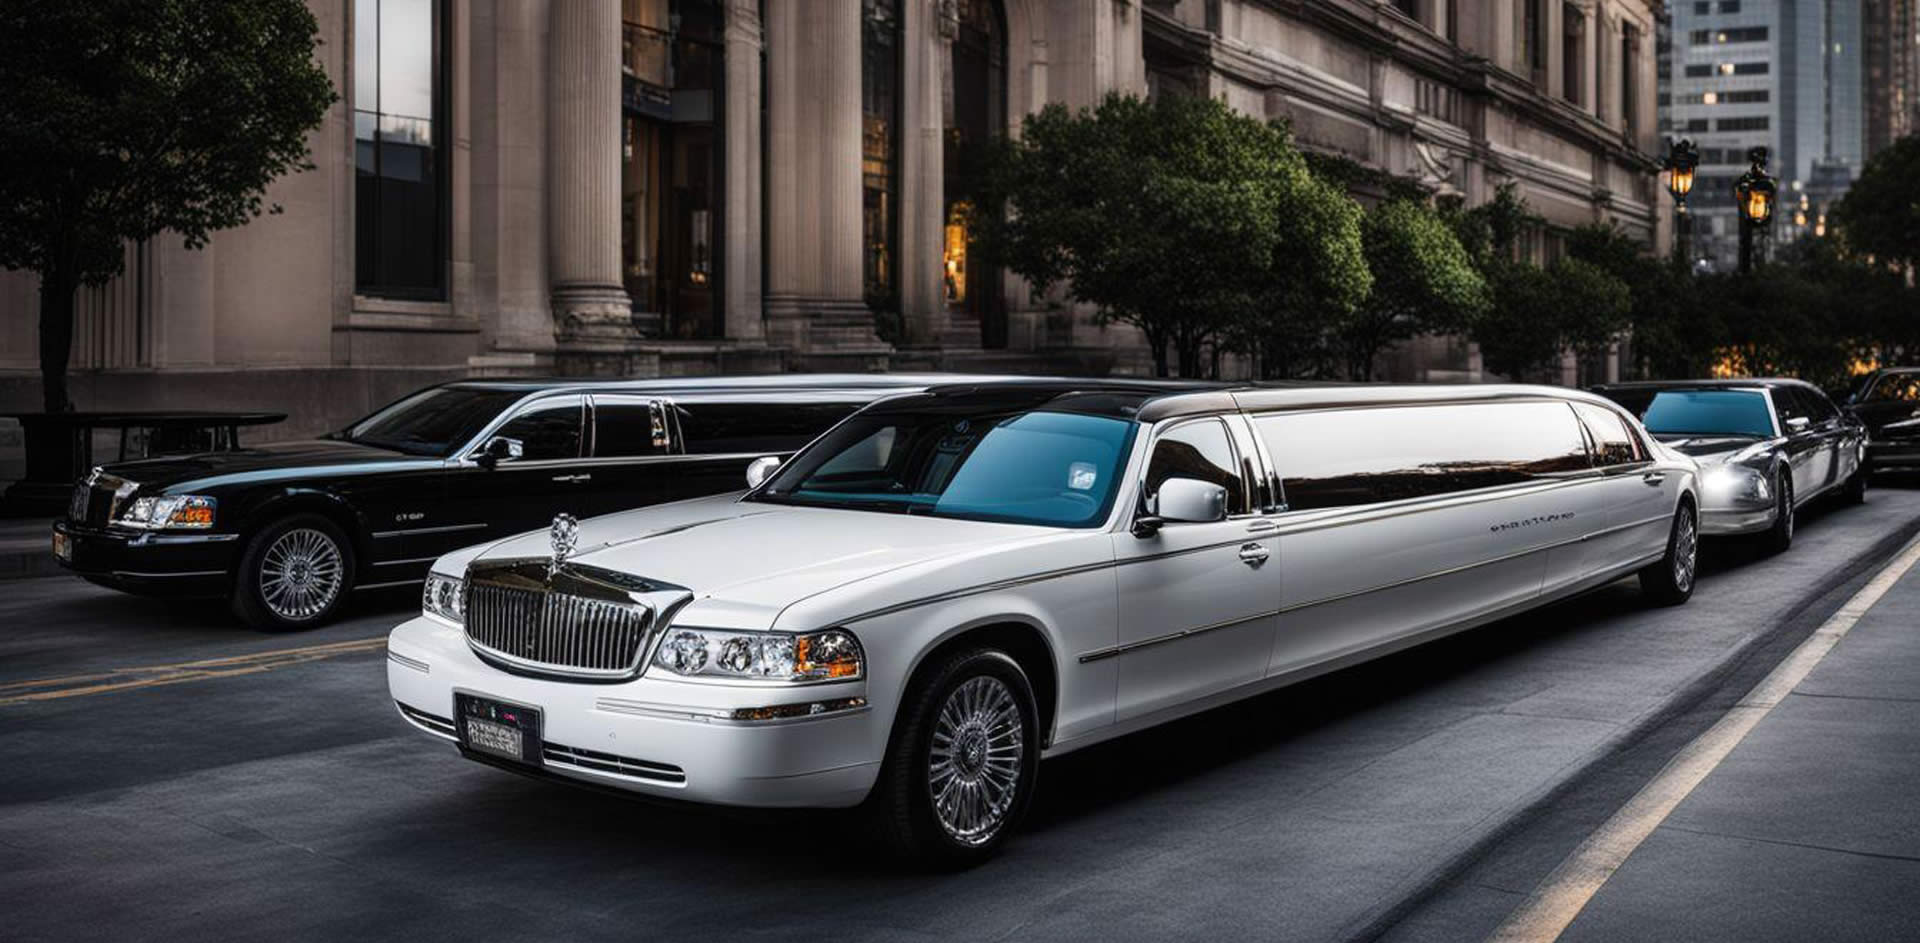 A long white limousine parked on the side of a road